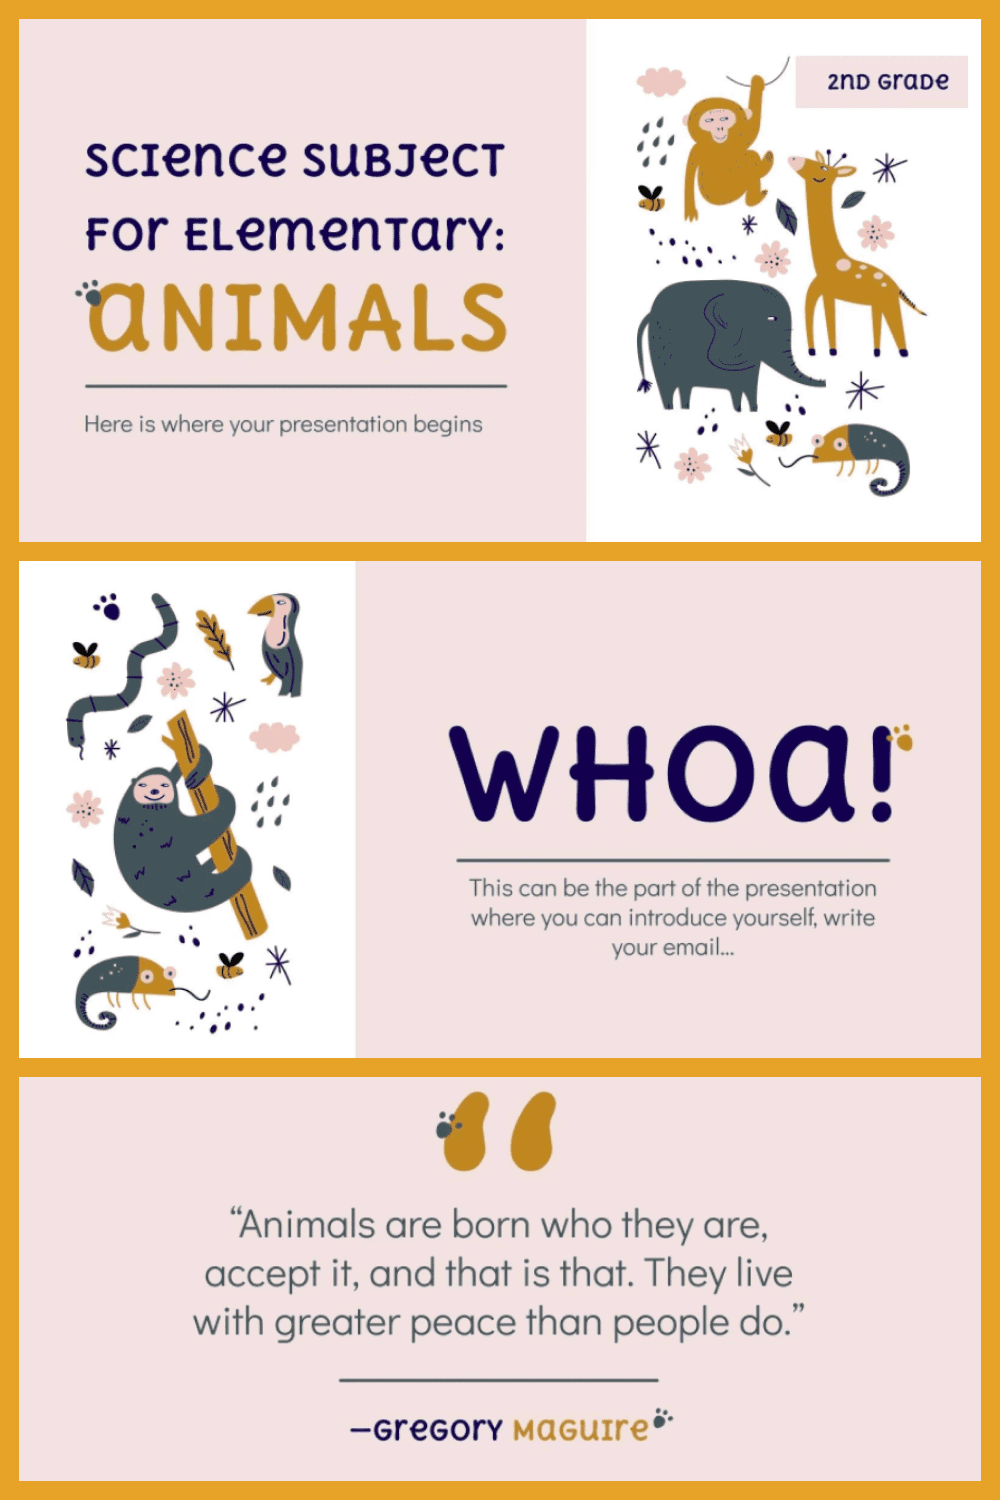 Science subject for elementary: animals.